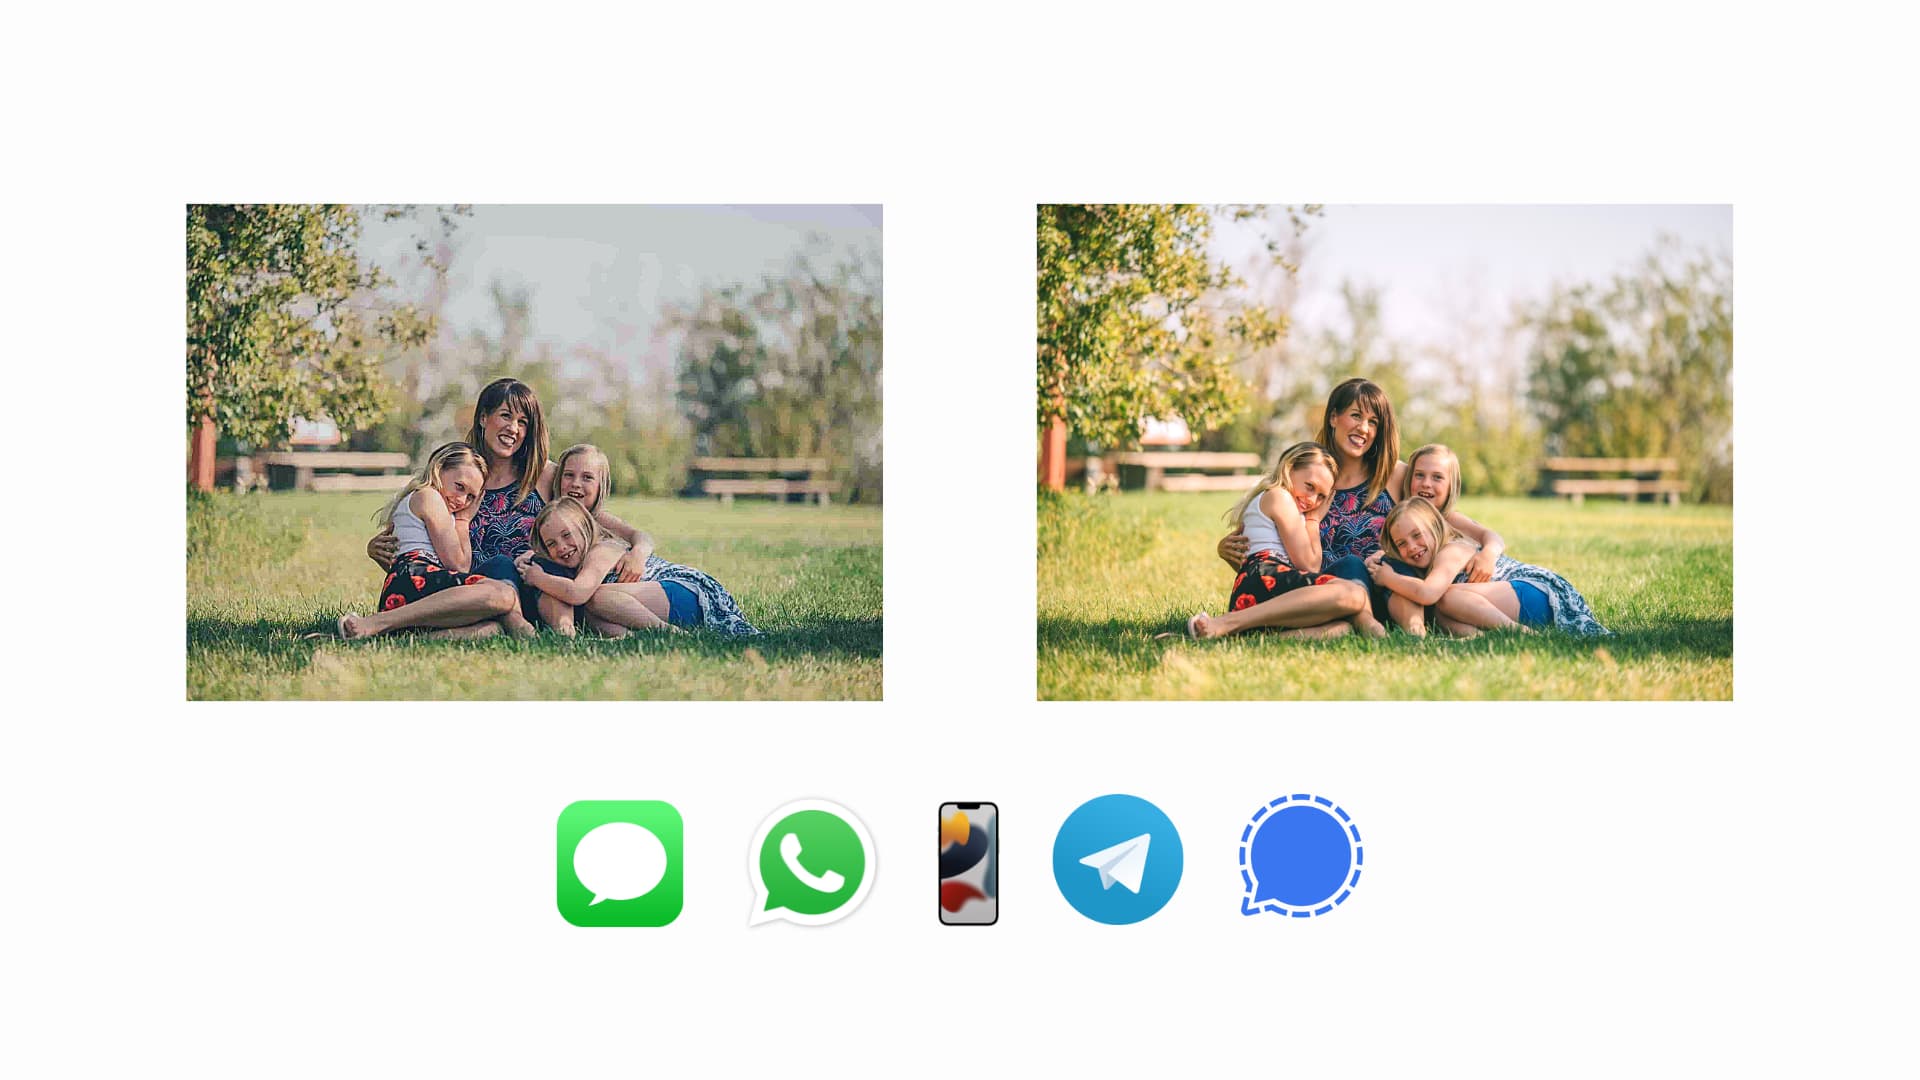 Same family picture in low and high quality with iMessage, WhatsApp, Telegram, Signal and iPhone icons on a light background